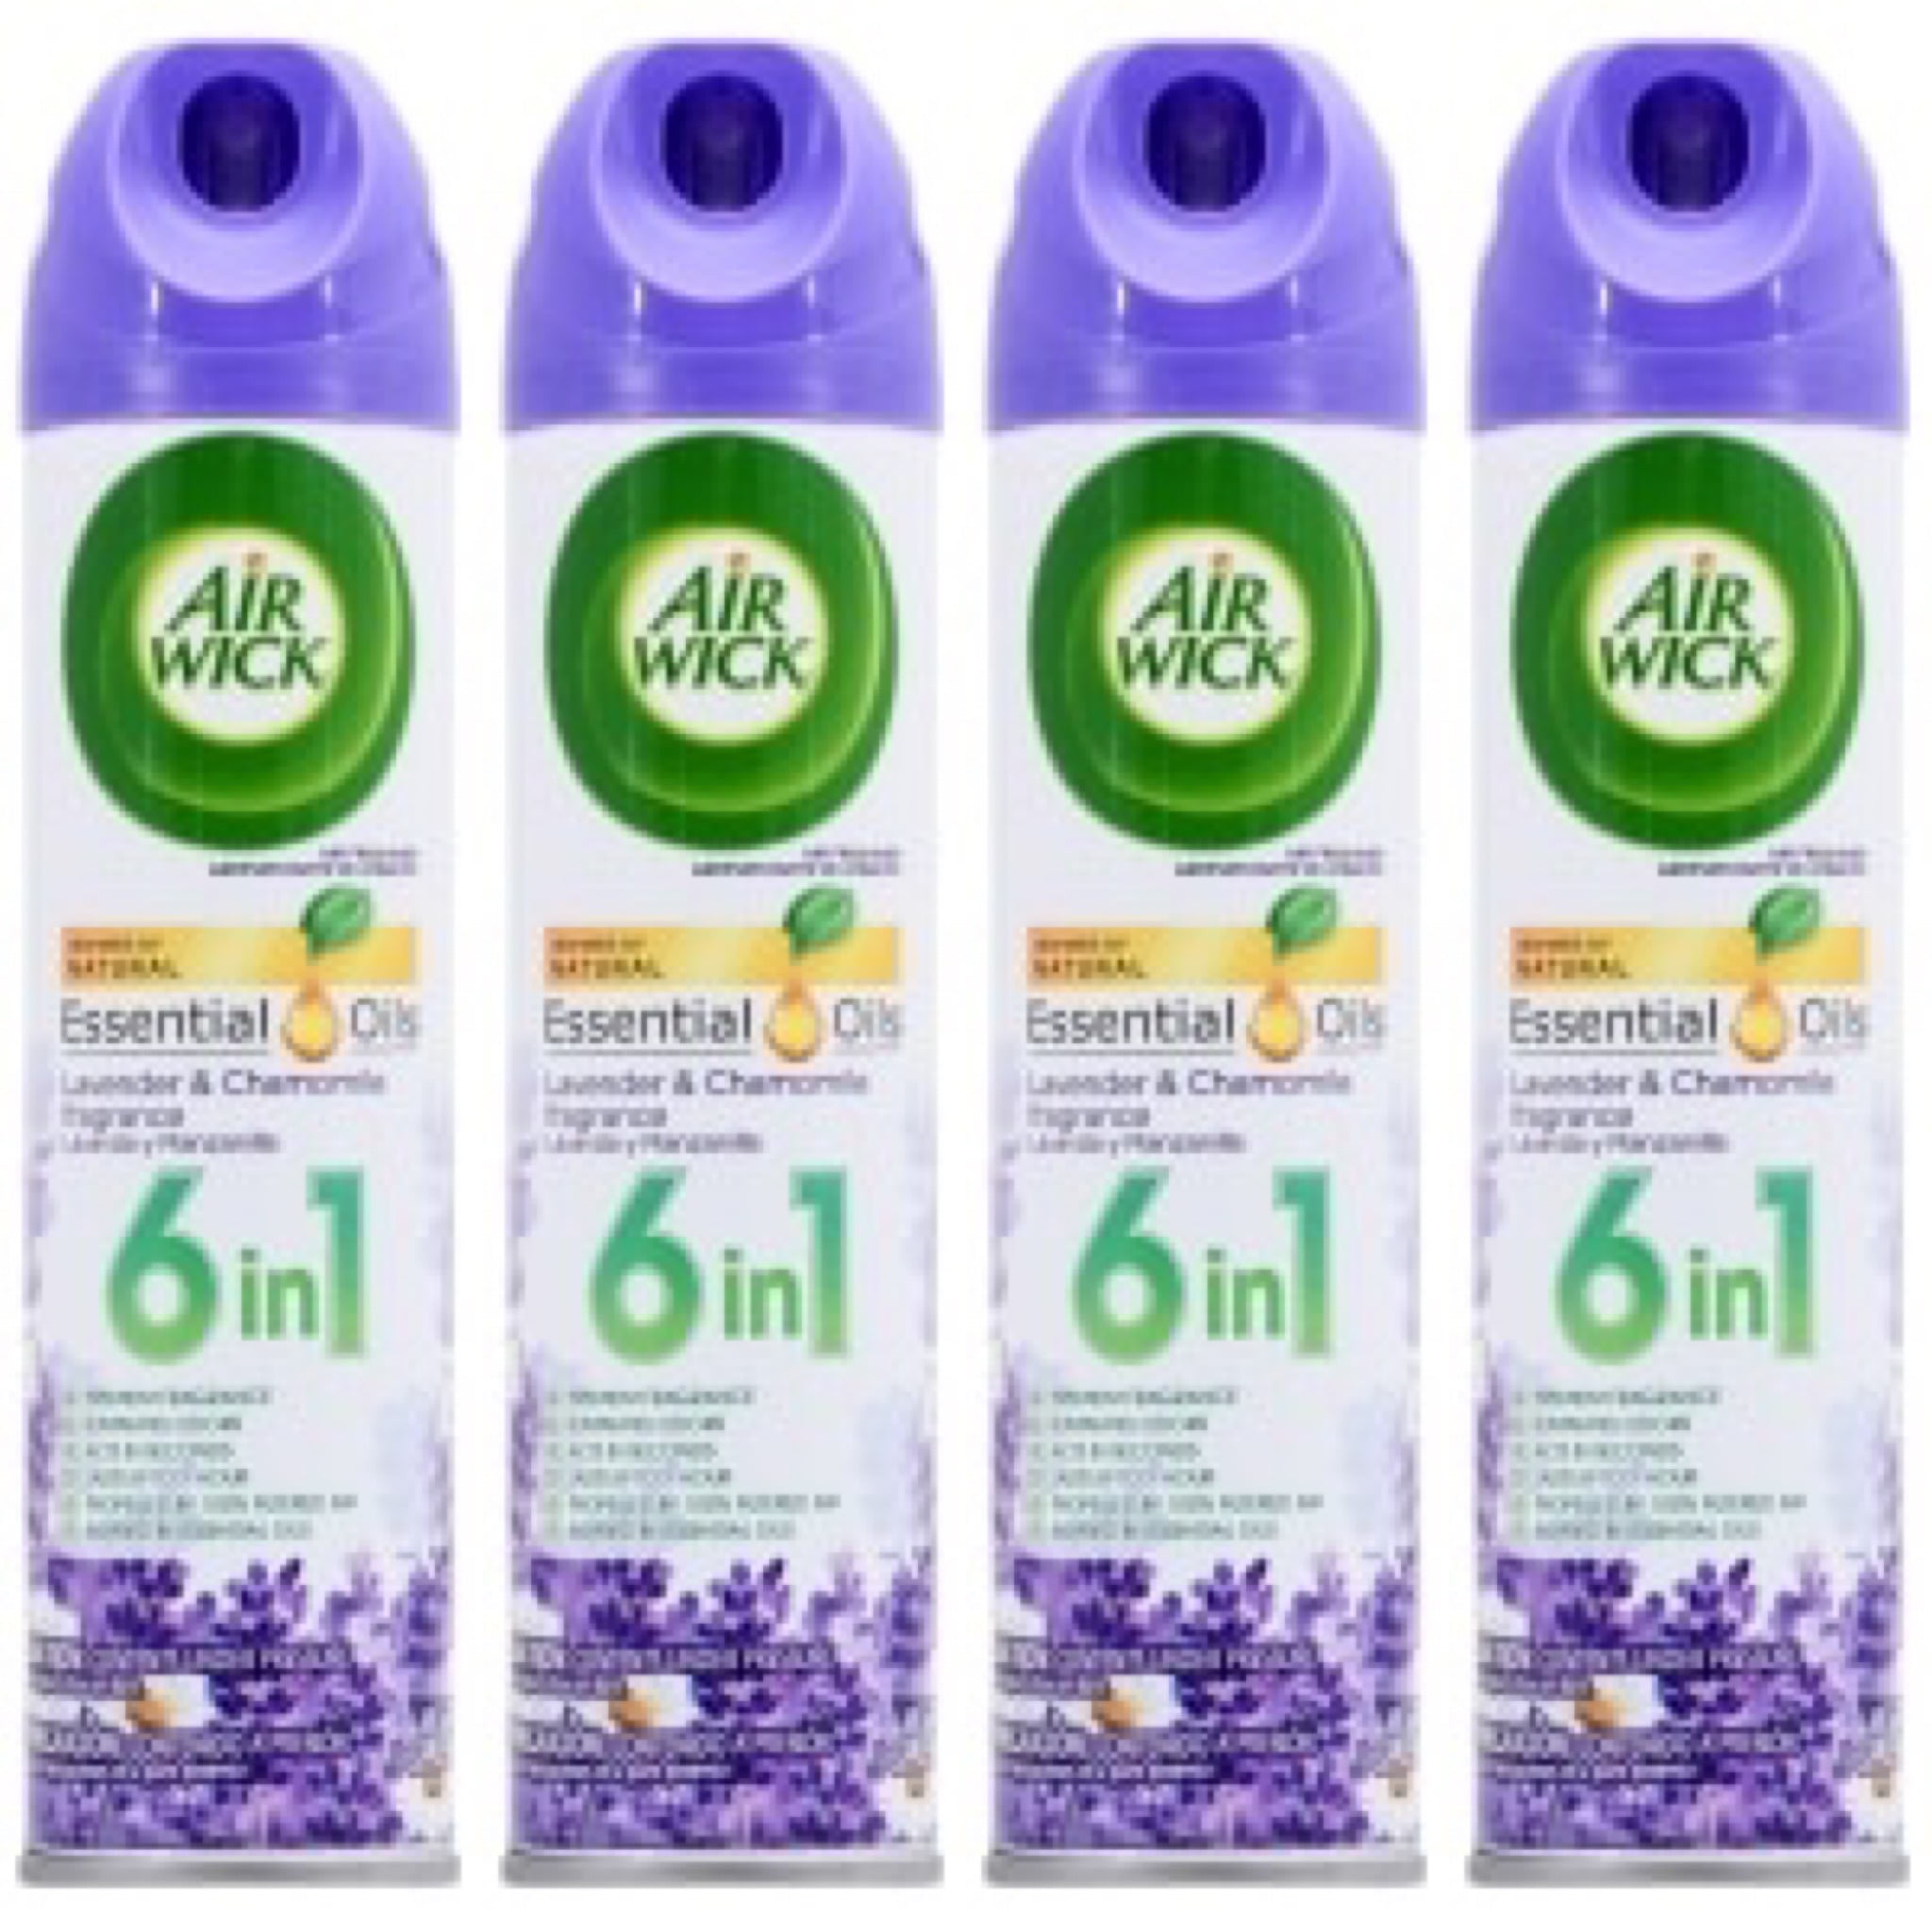 4-air-wick-6-in-1-lavender-chamomile-air-fresheners-spray-8-oz-cans